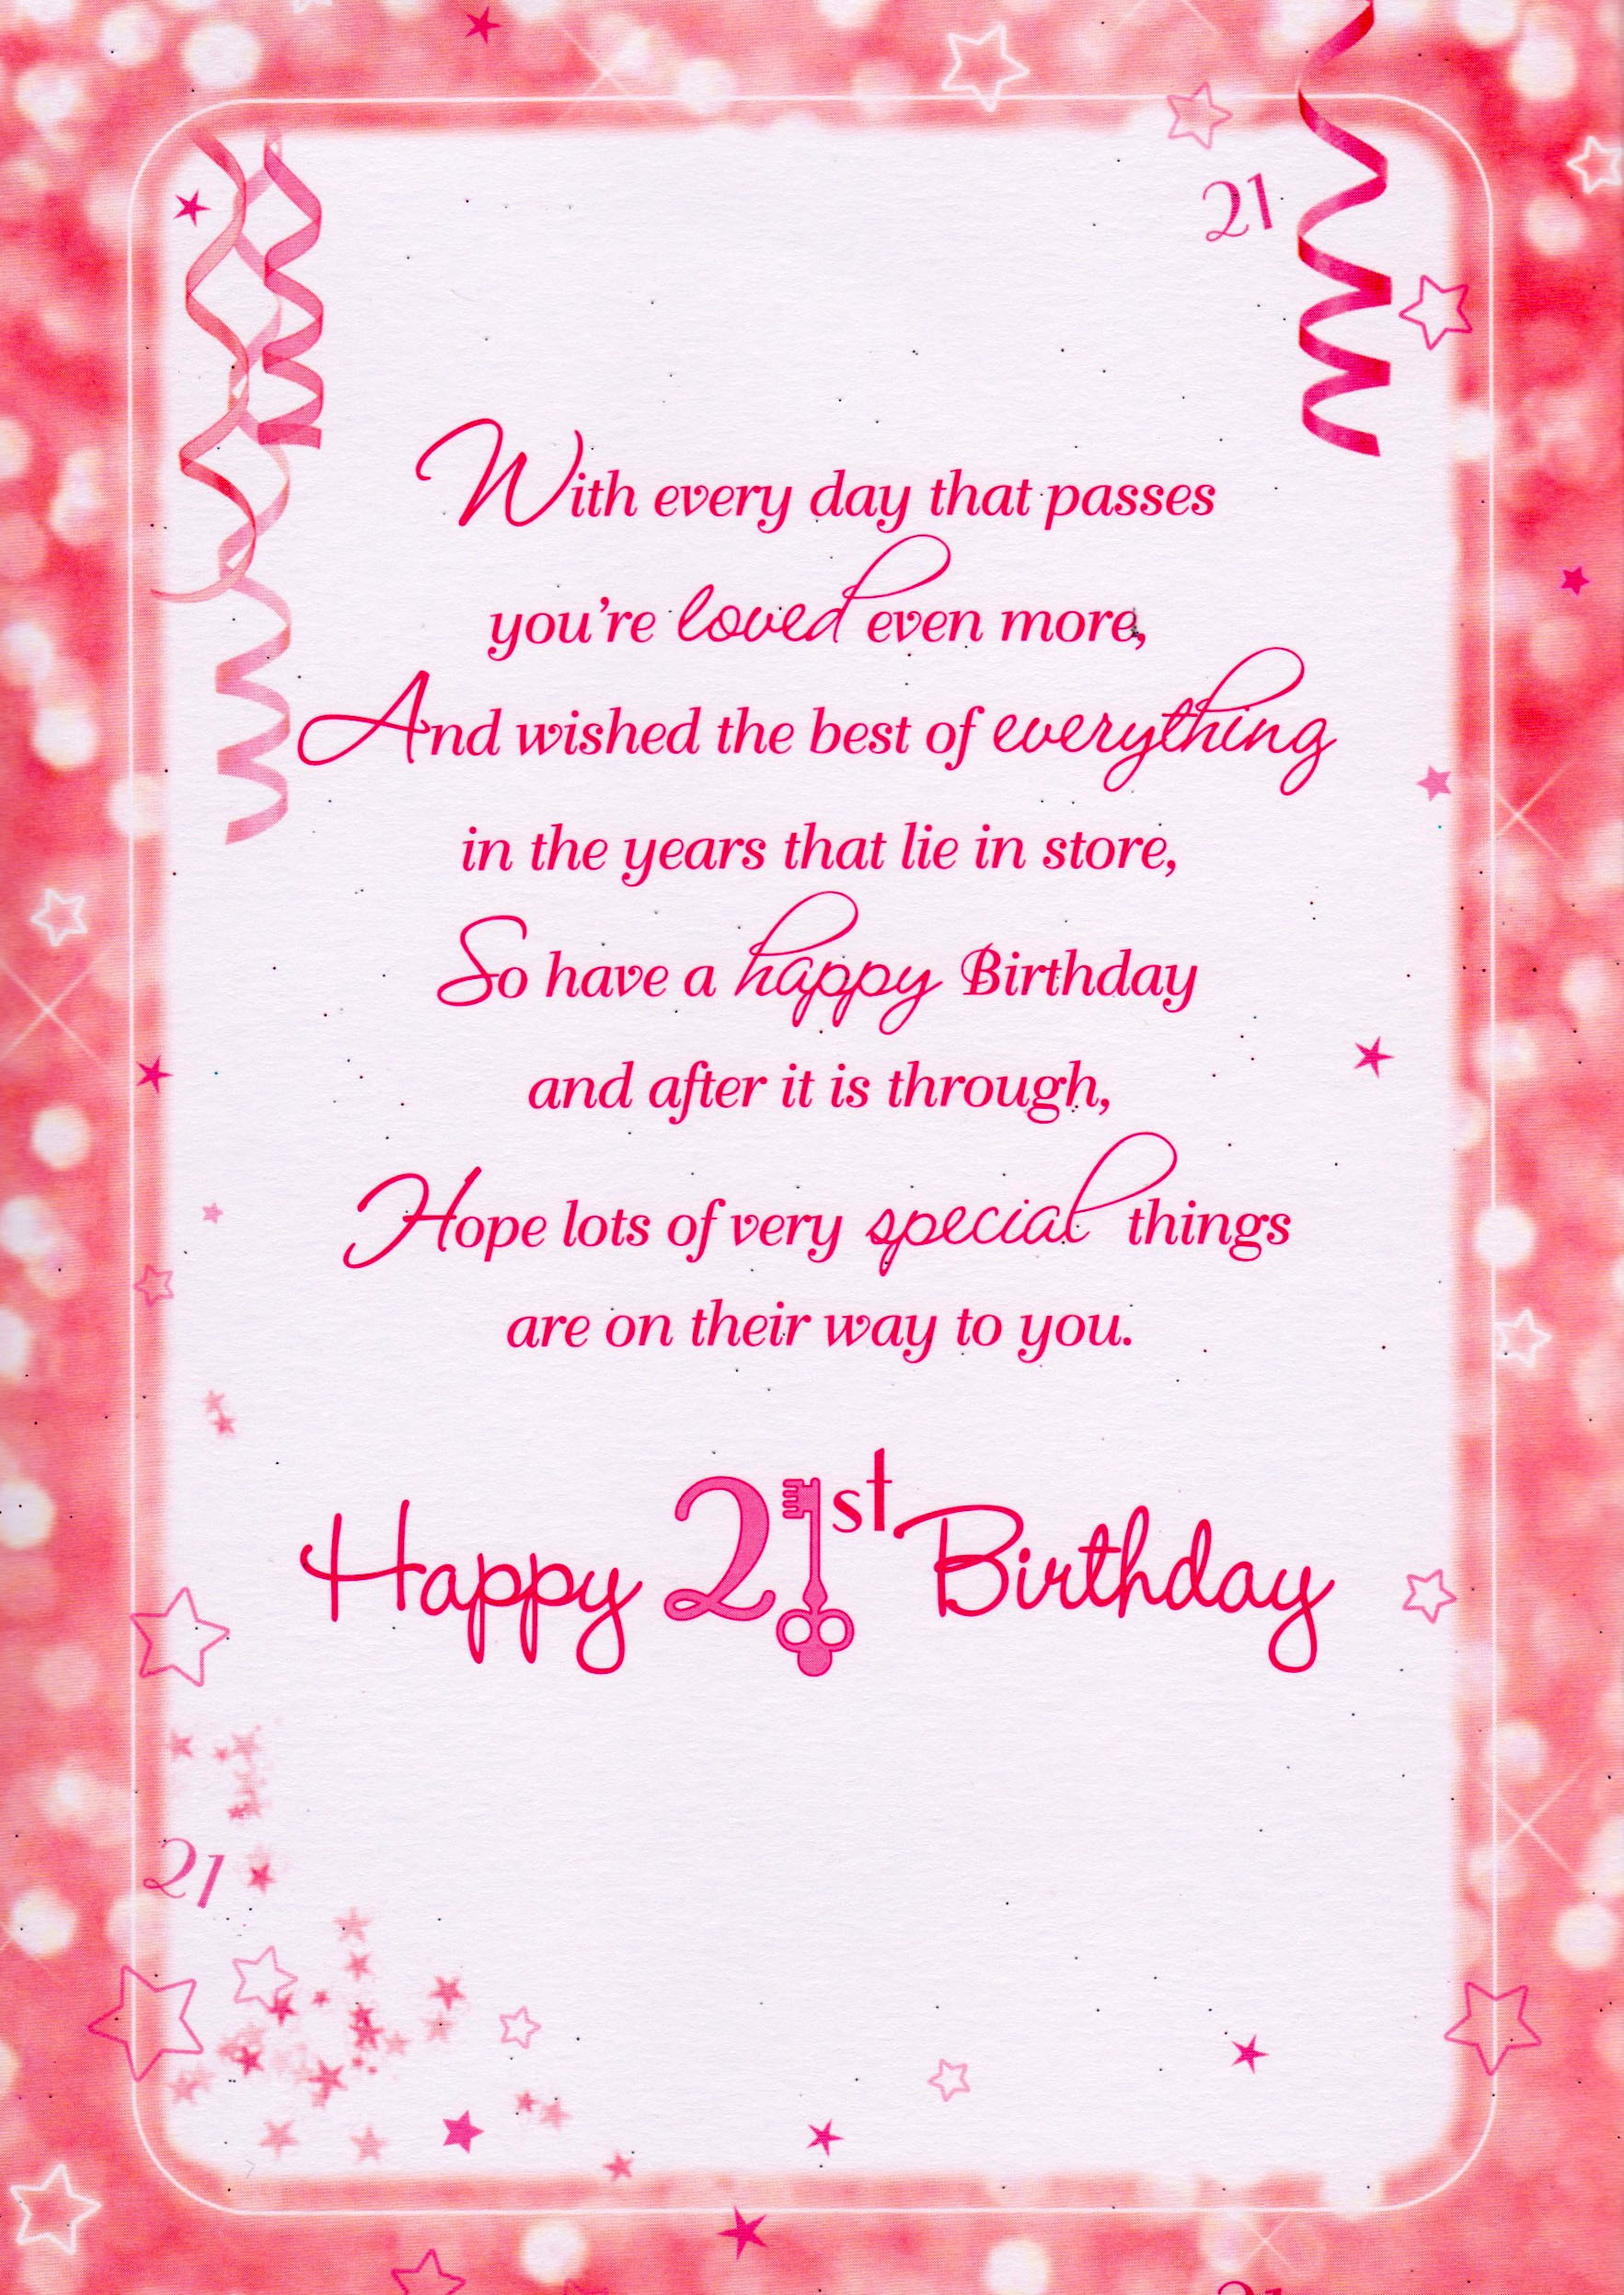 Inspirational Happy 21st Birthday Wishes for Daughter